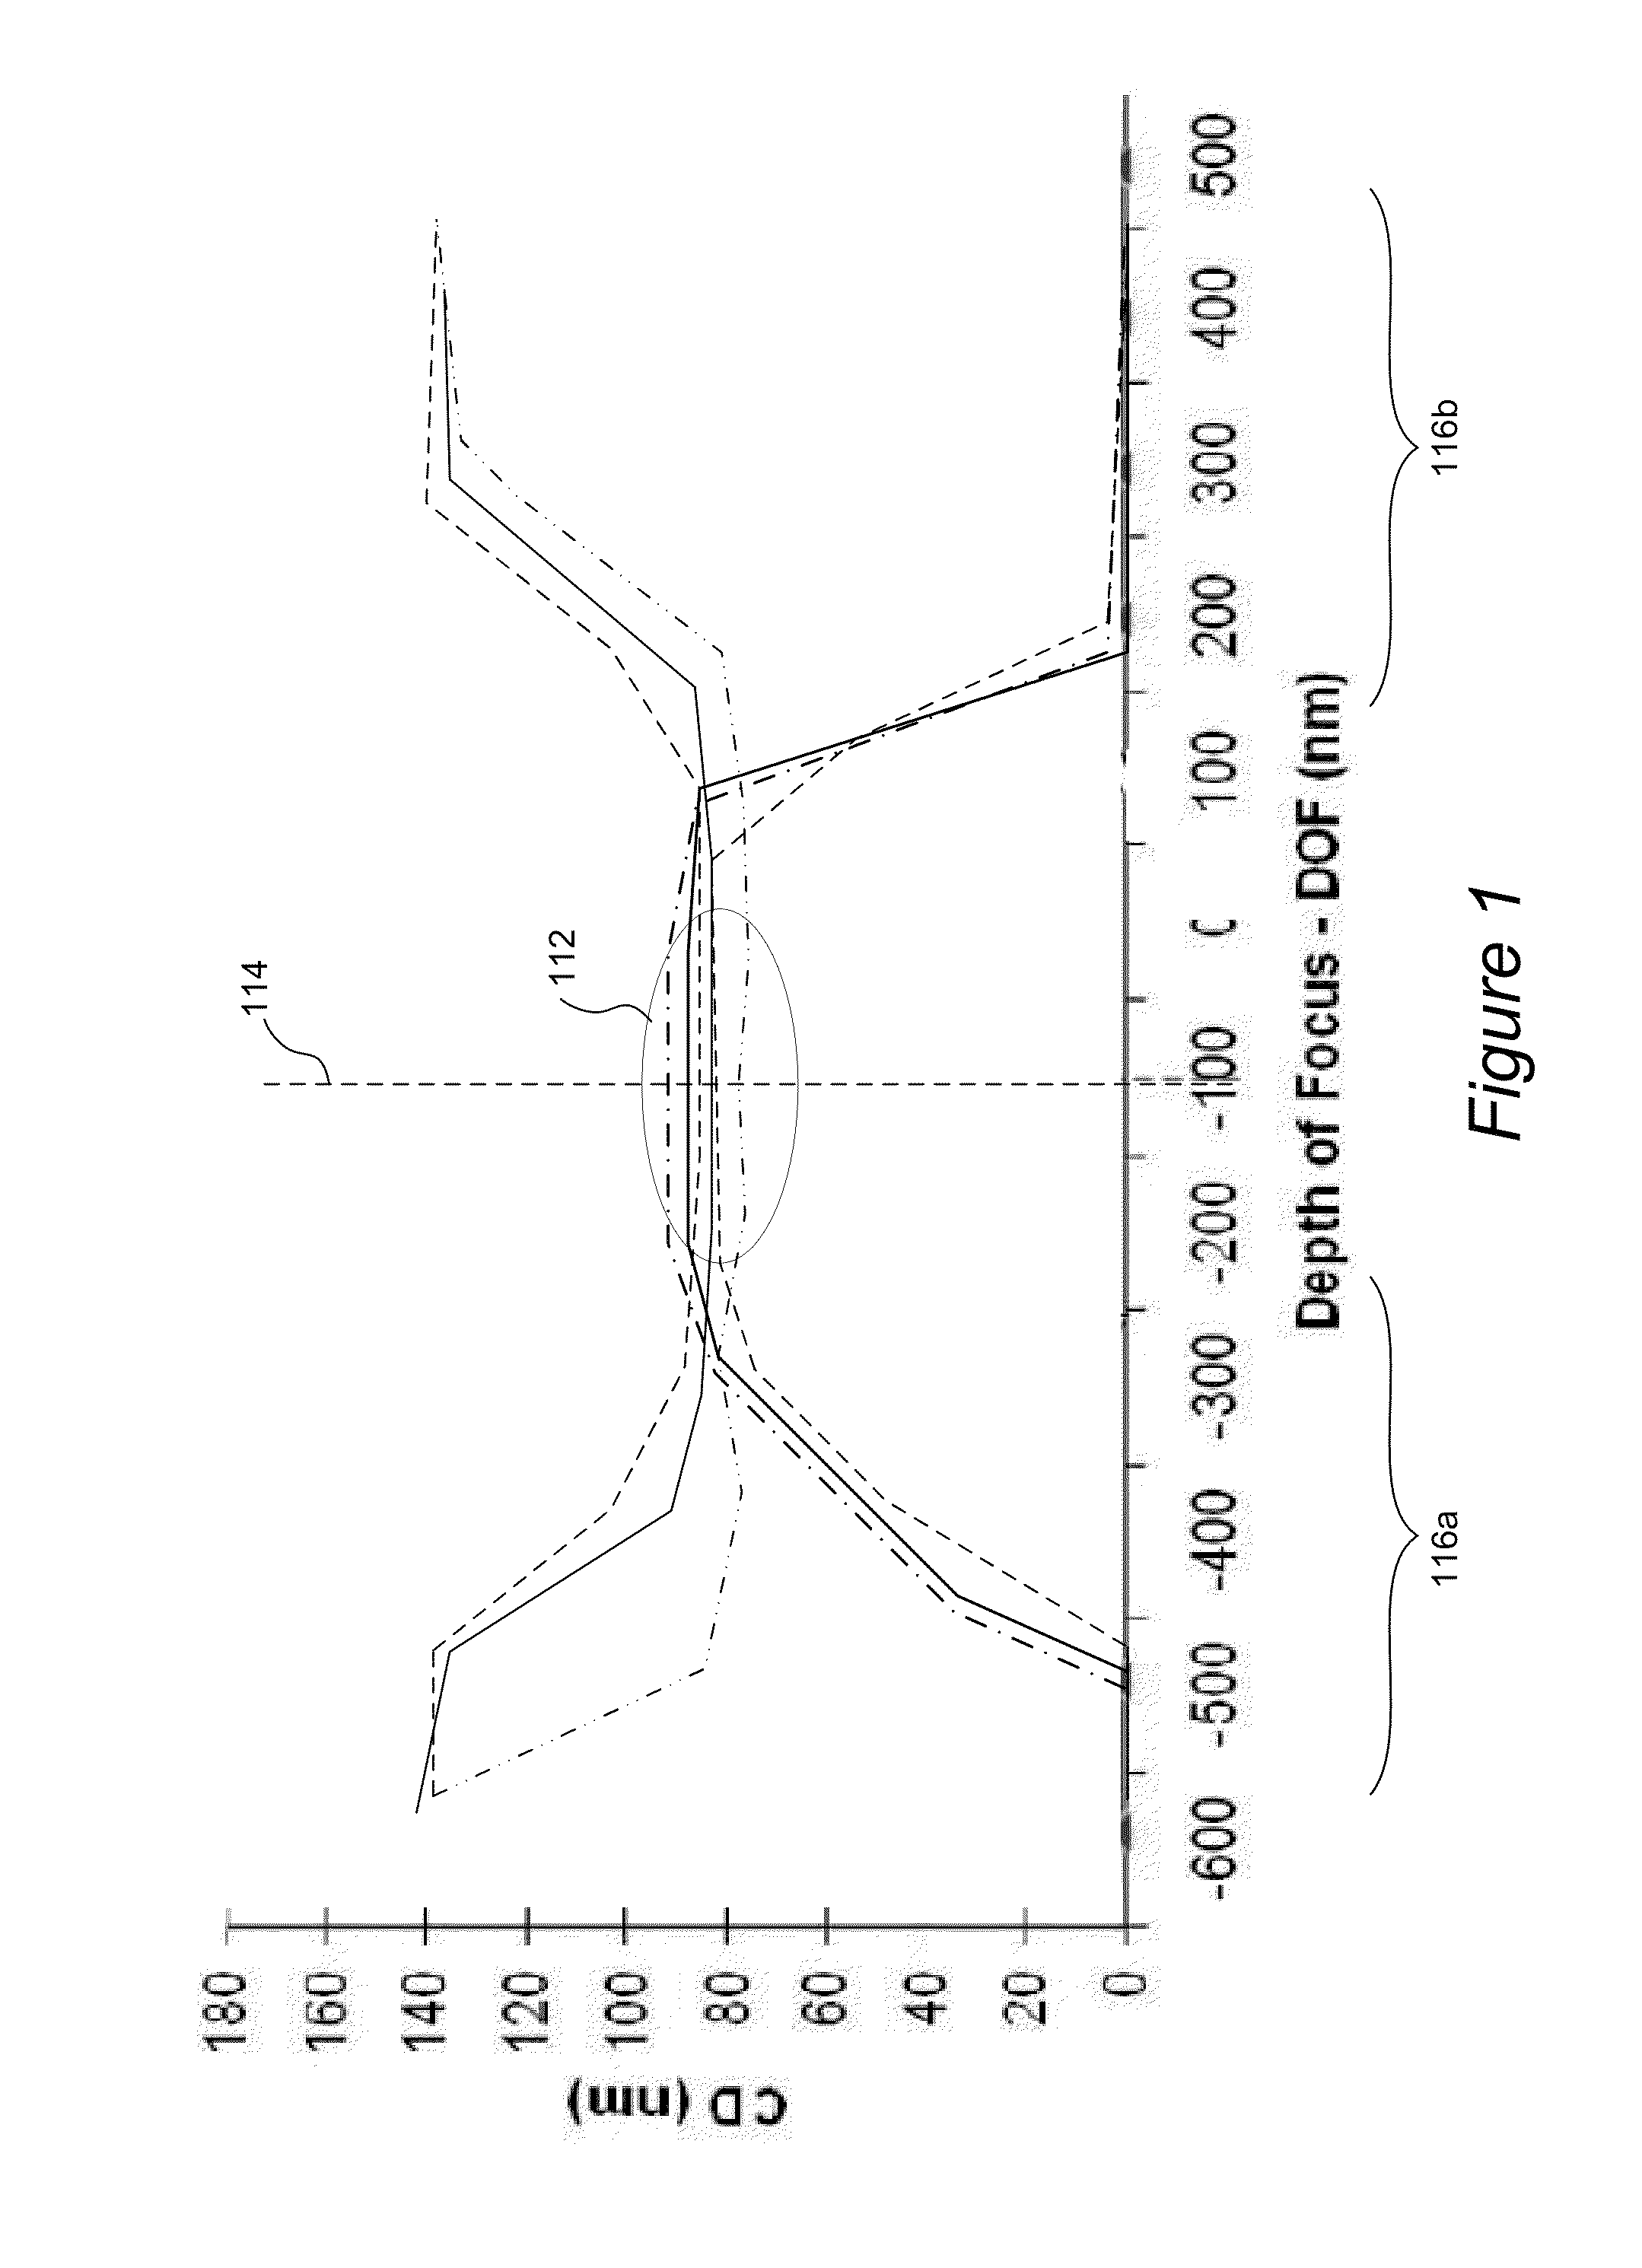 Differential methods and apparatus for metrology of semiconductor targets